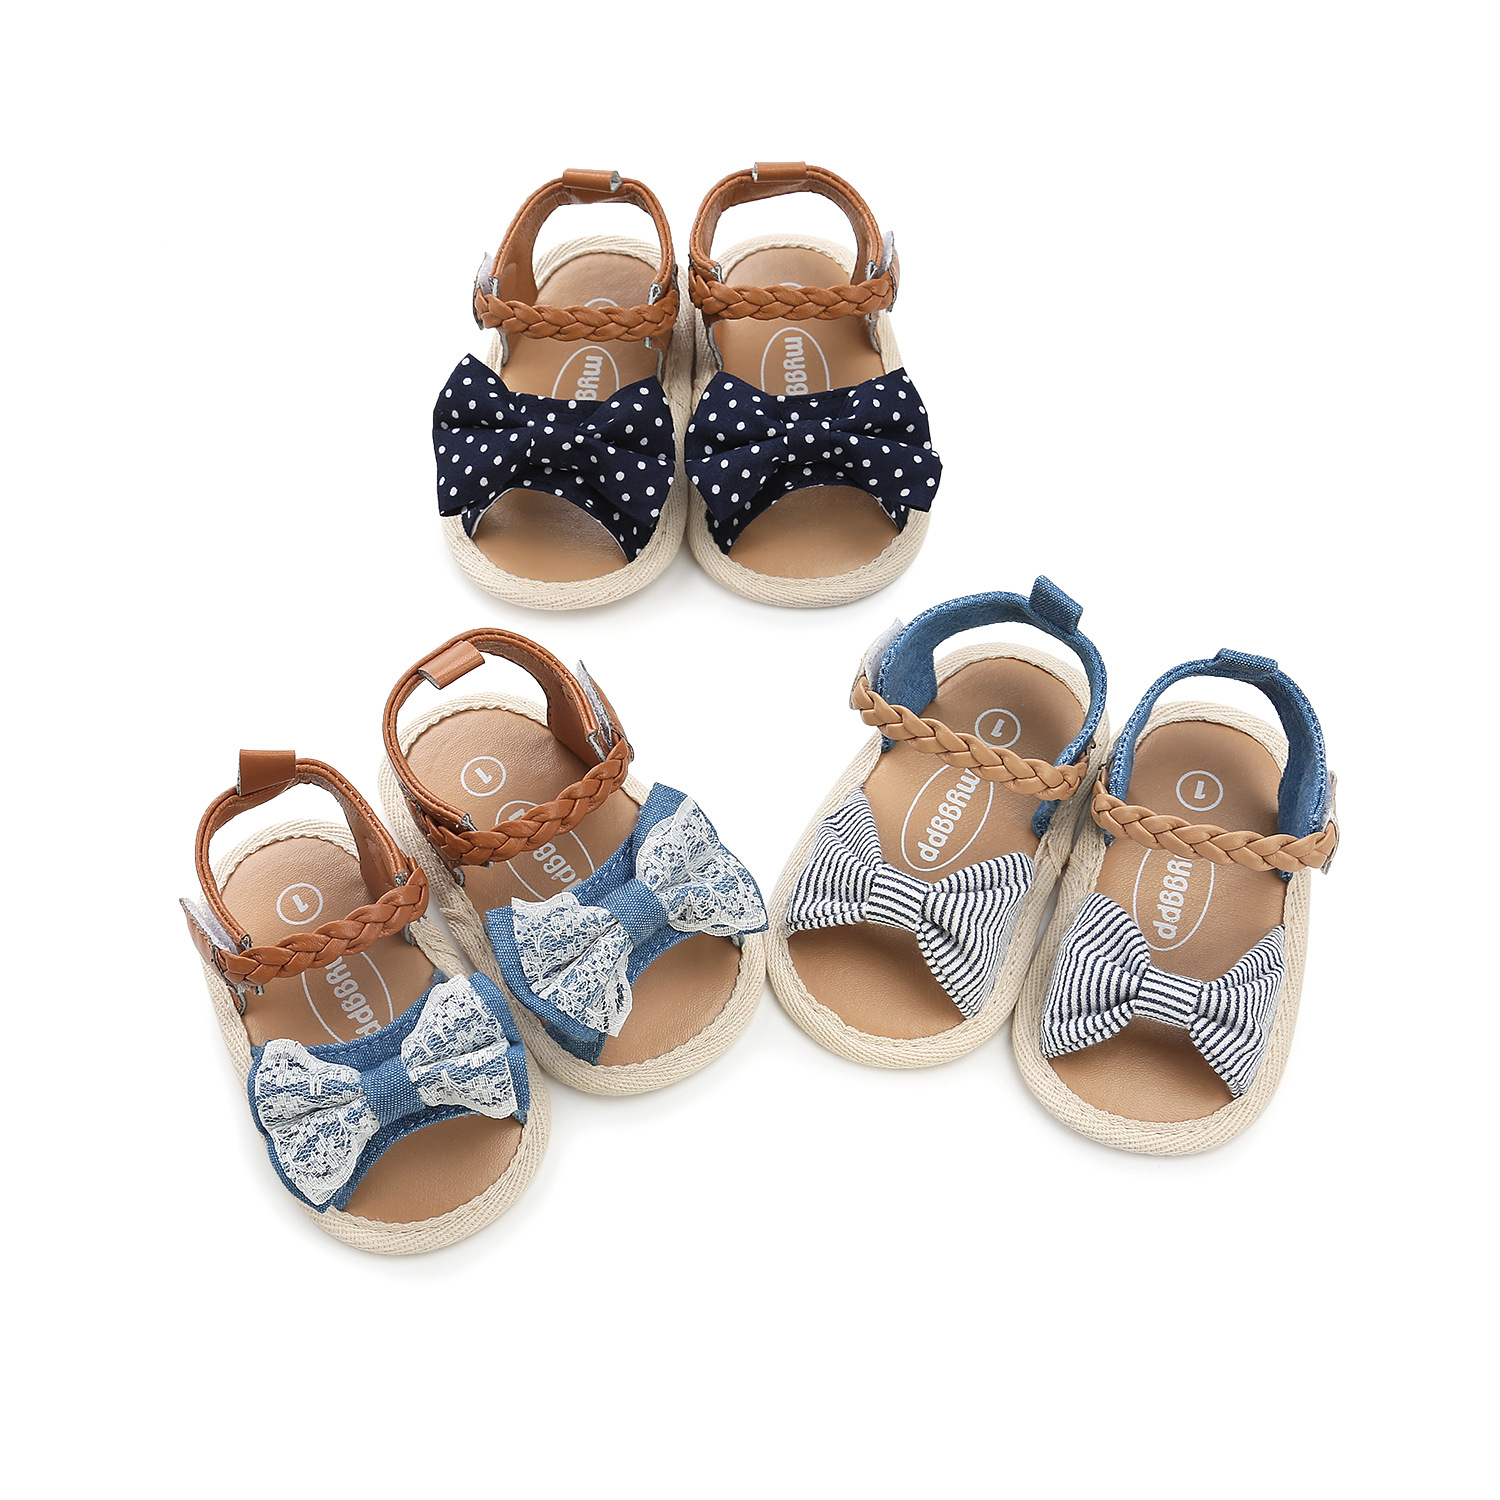 

Girl Sandals Summer Baby Girl Shoes Cotton Canvas Dotted Bow Girl Newborn Baby Shoes Playtoday Beach Sandals